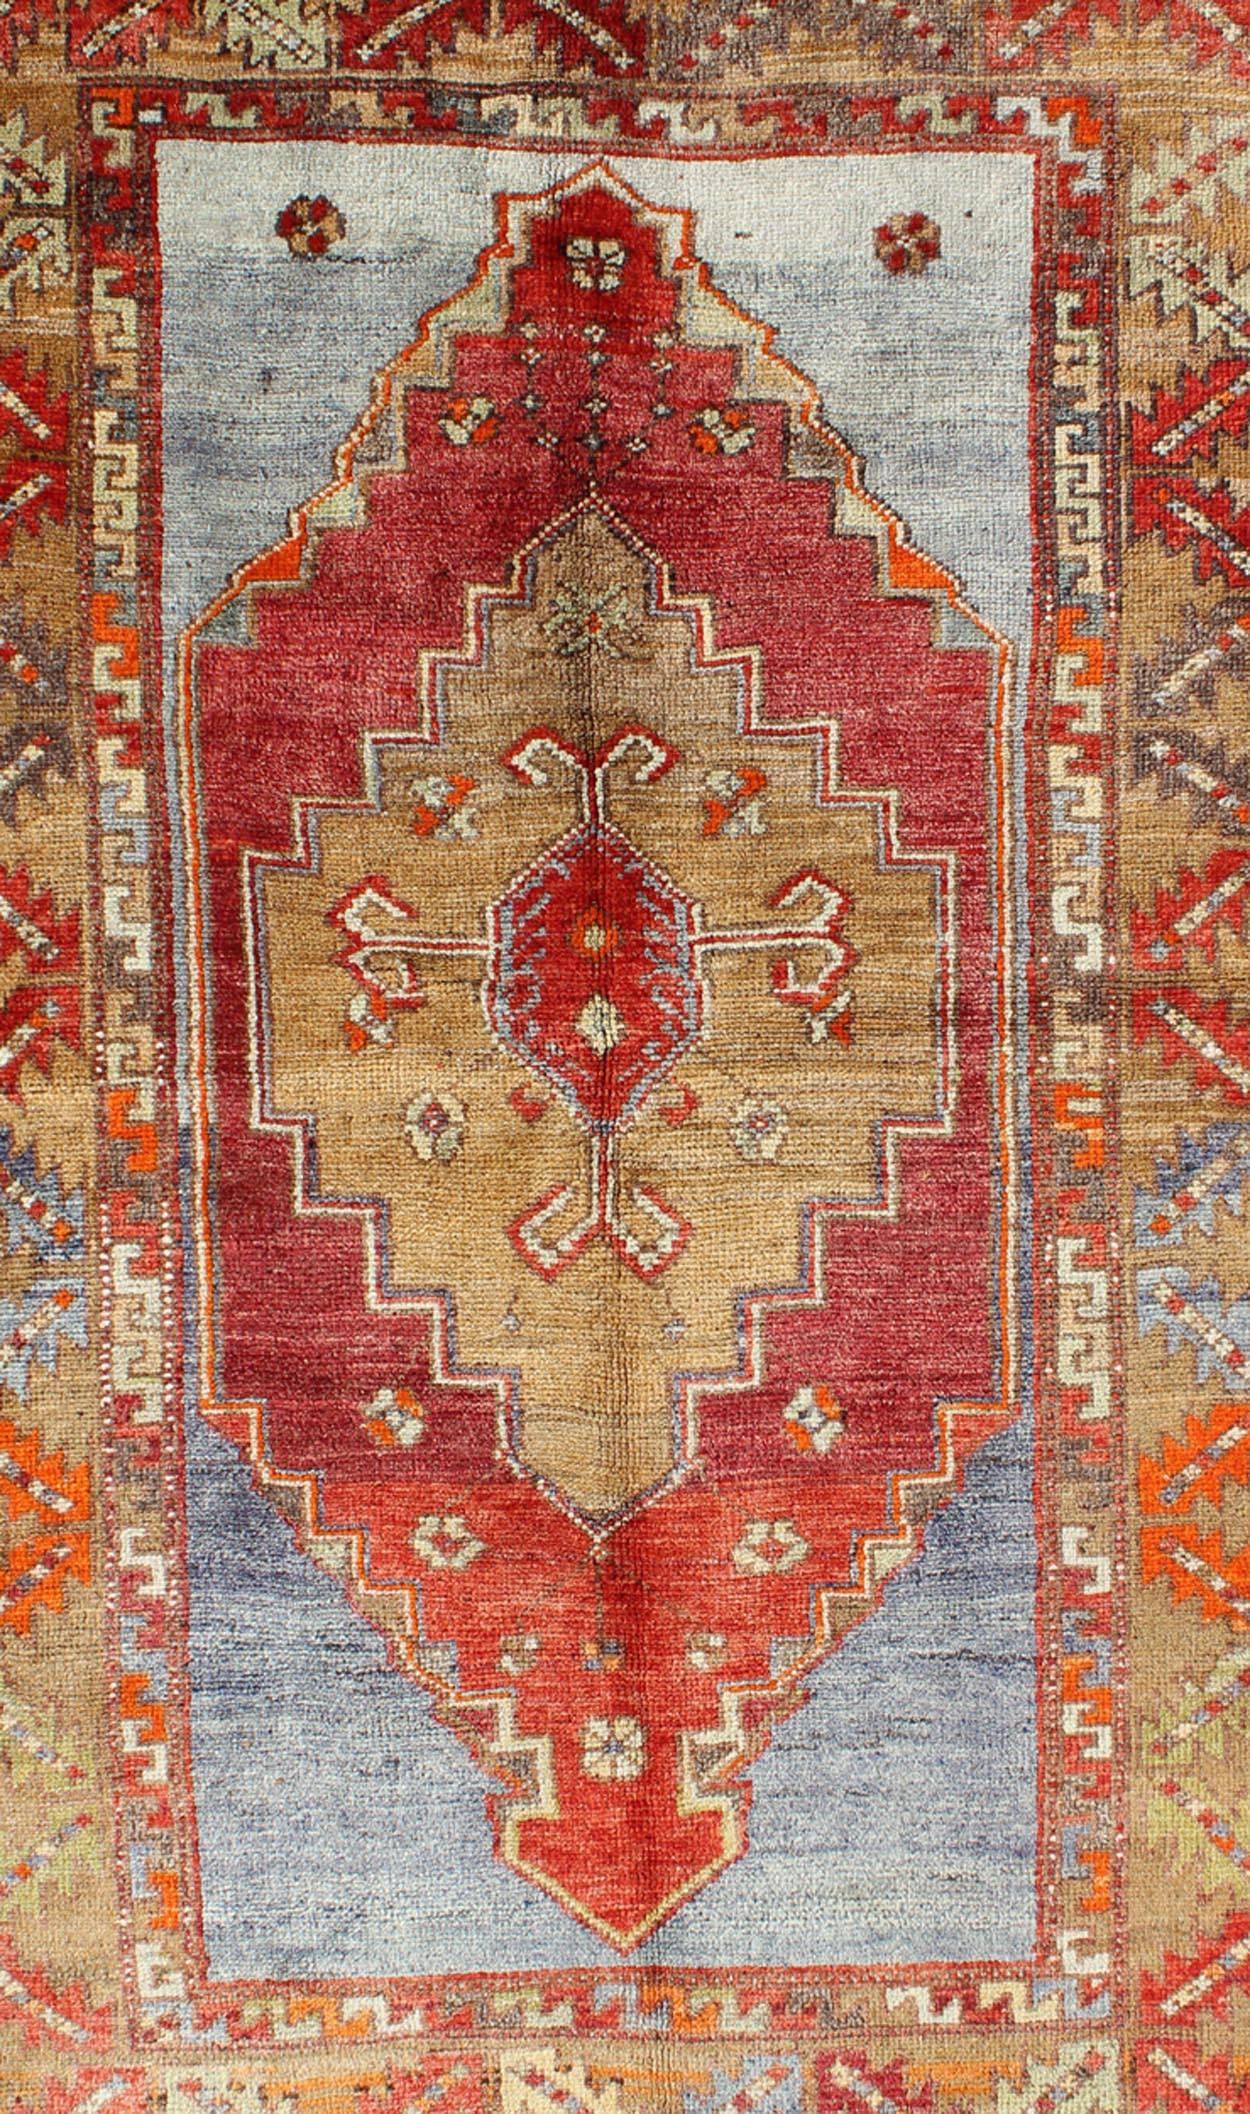 Hand-Knotted Multicolored Vintage Turkish Oushak Rug in Red, Blue and Soft Orange Colors